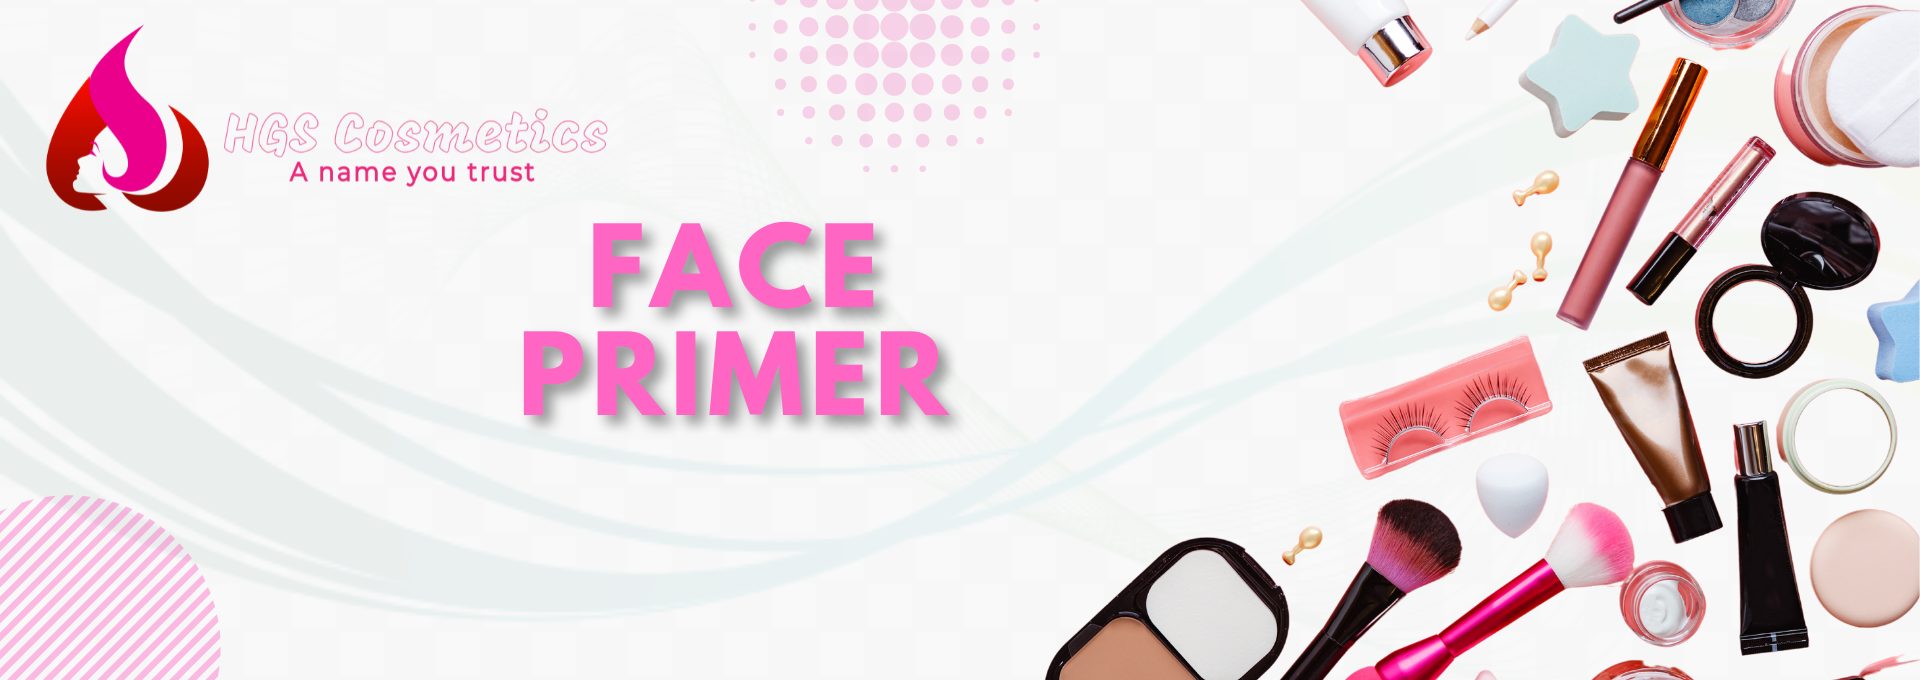 Shop Best Face Primer products Online @ HGS Cosmetics